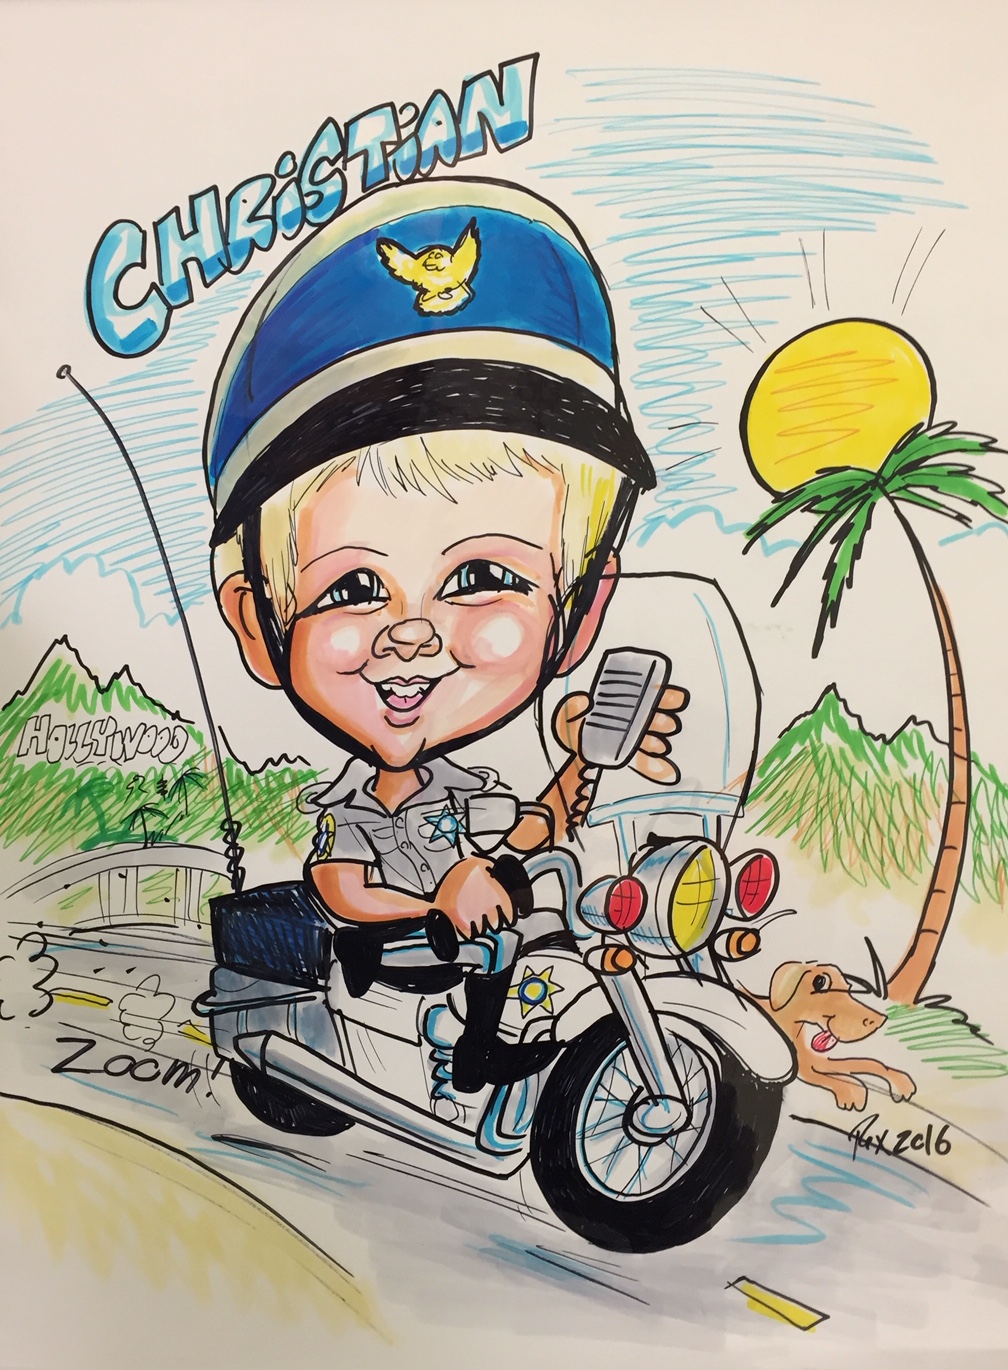 Caricature of child on police motorcycle done by Rex